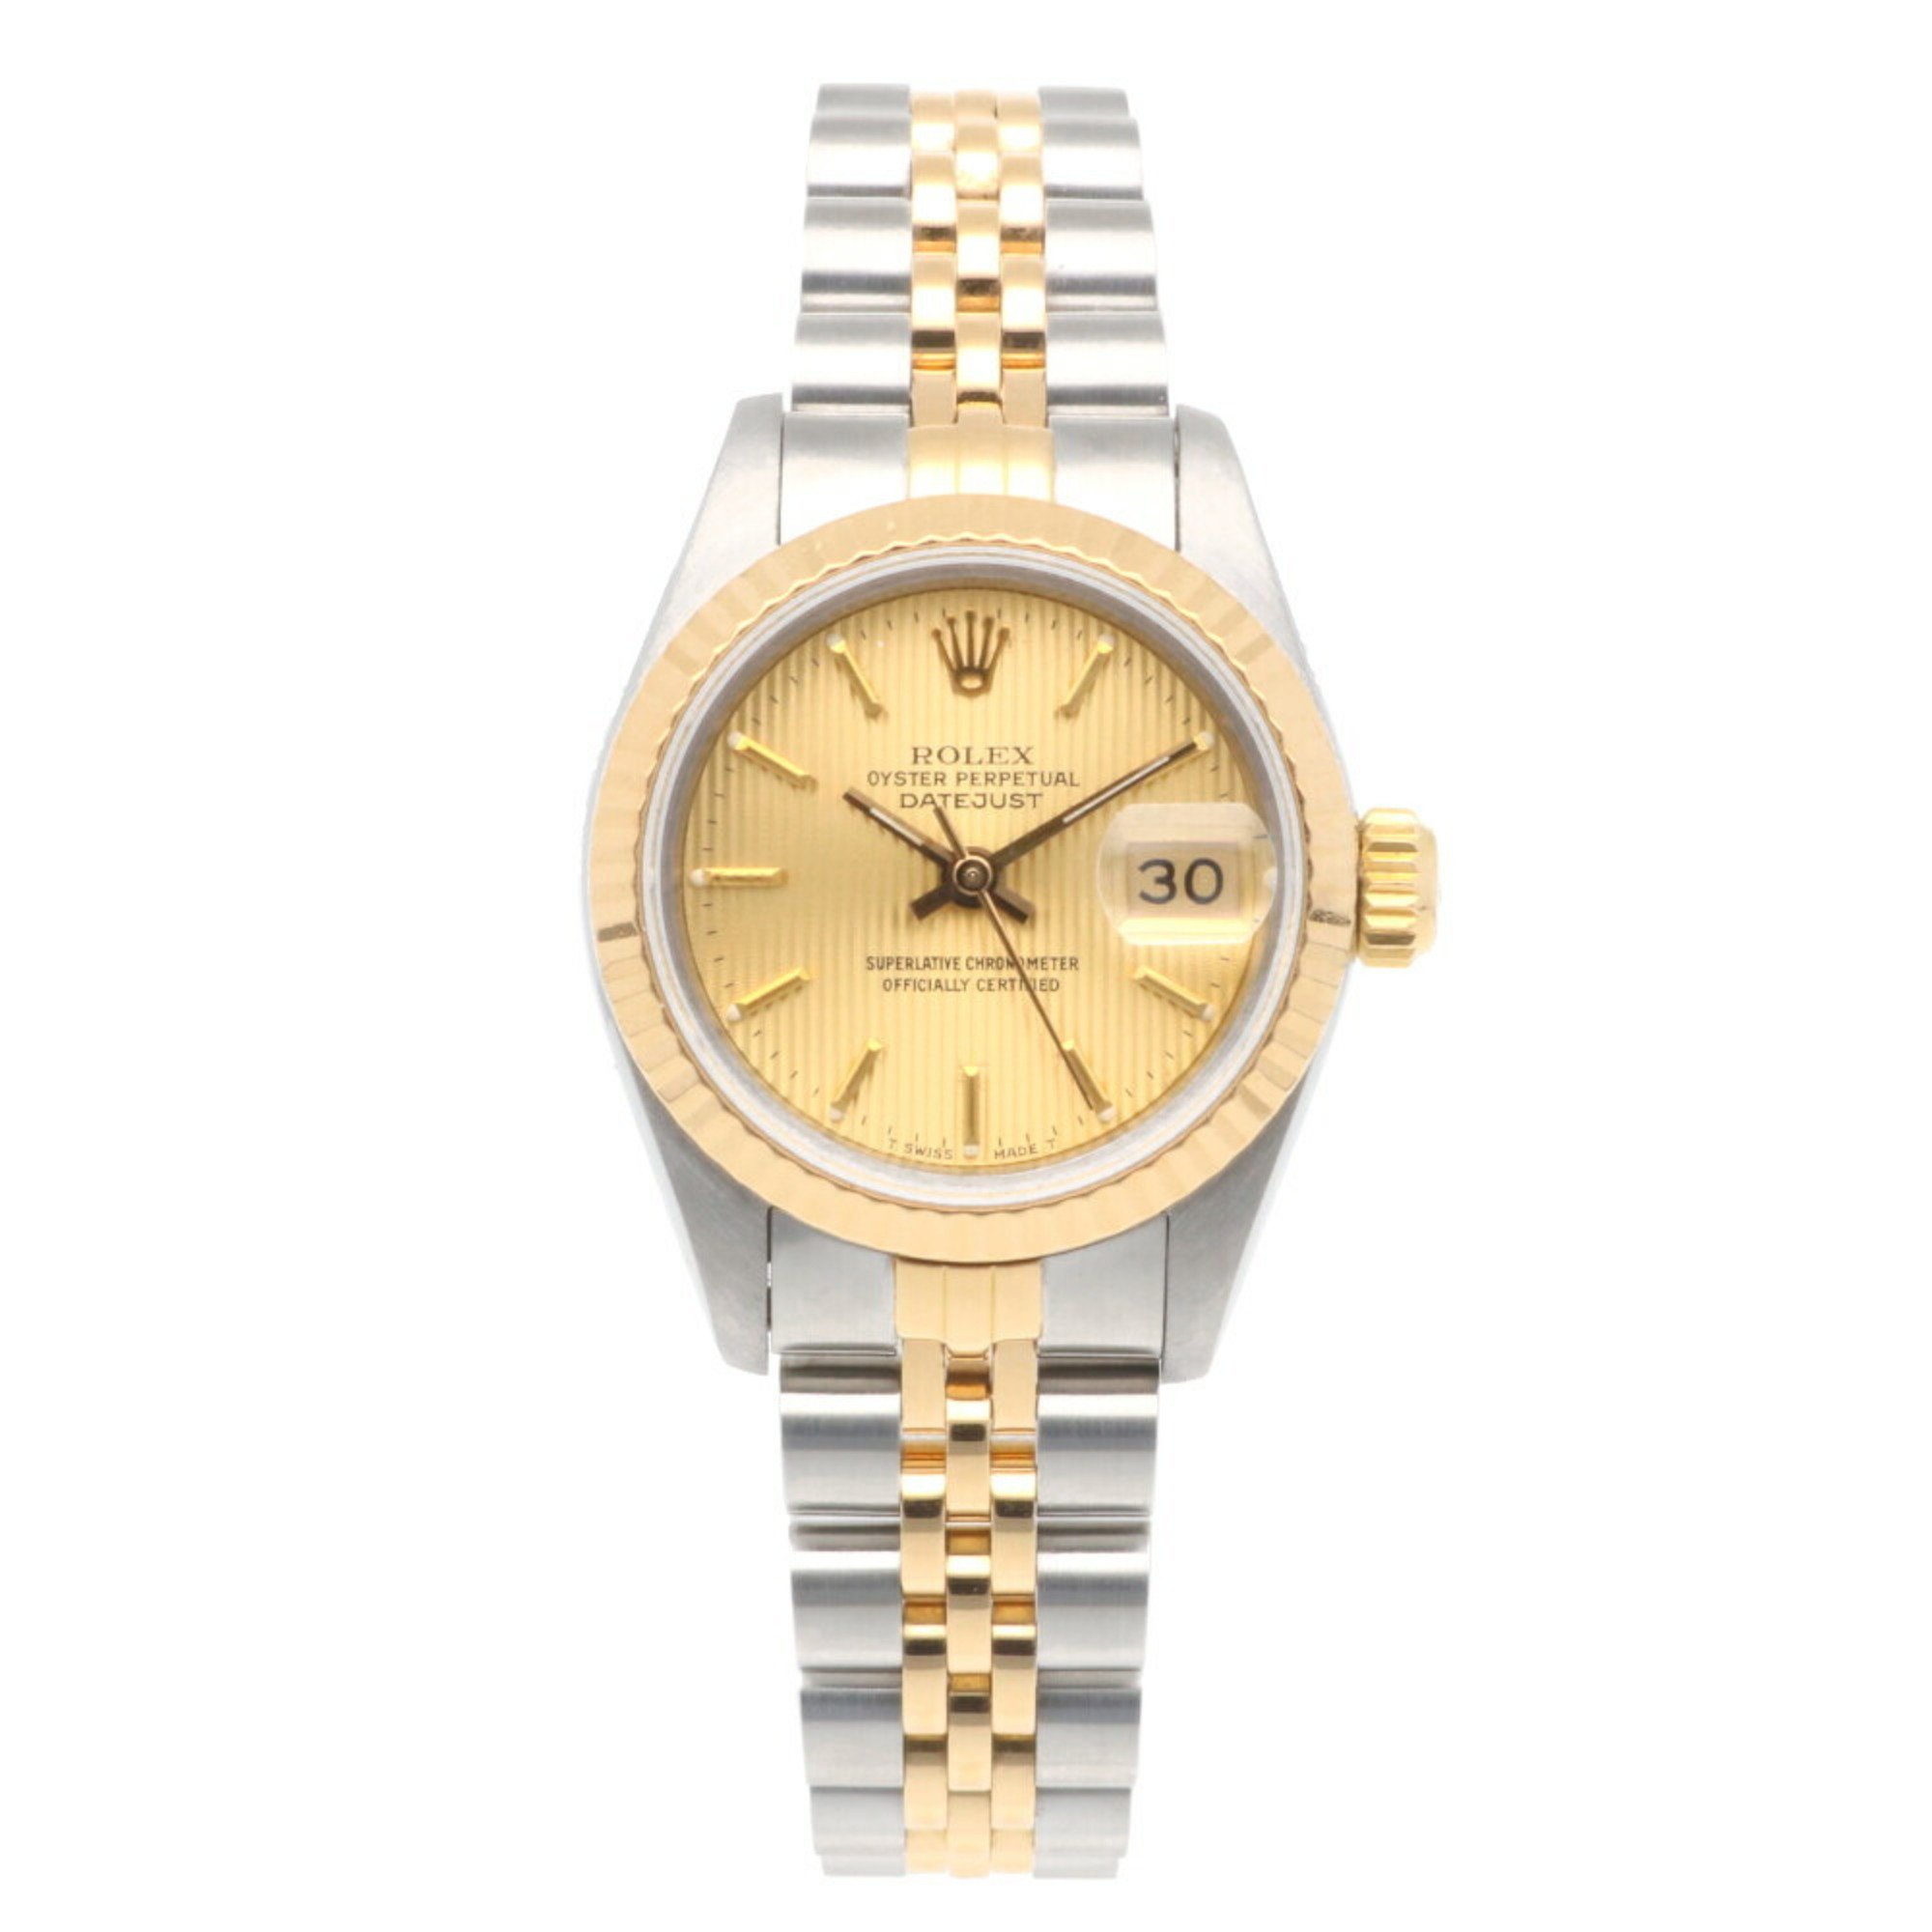 Rolex Datejust Oyster Perpetual Watch Stainless Steel 69173 Automatic Ladies ROLEX L Serial 1988 Tapestry Dial